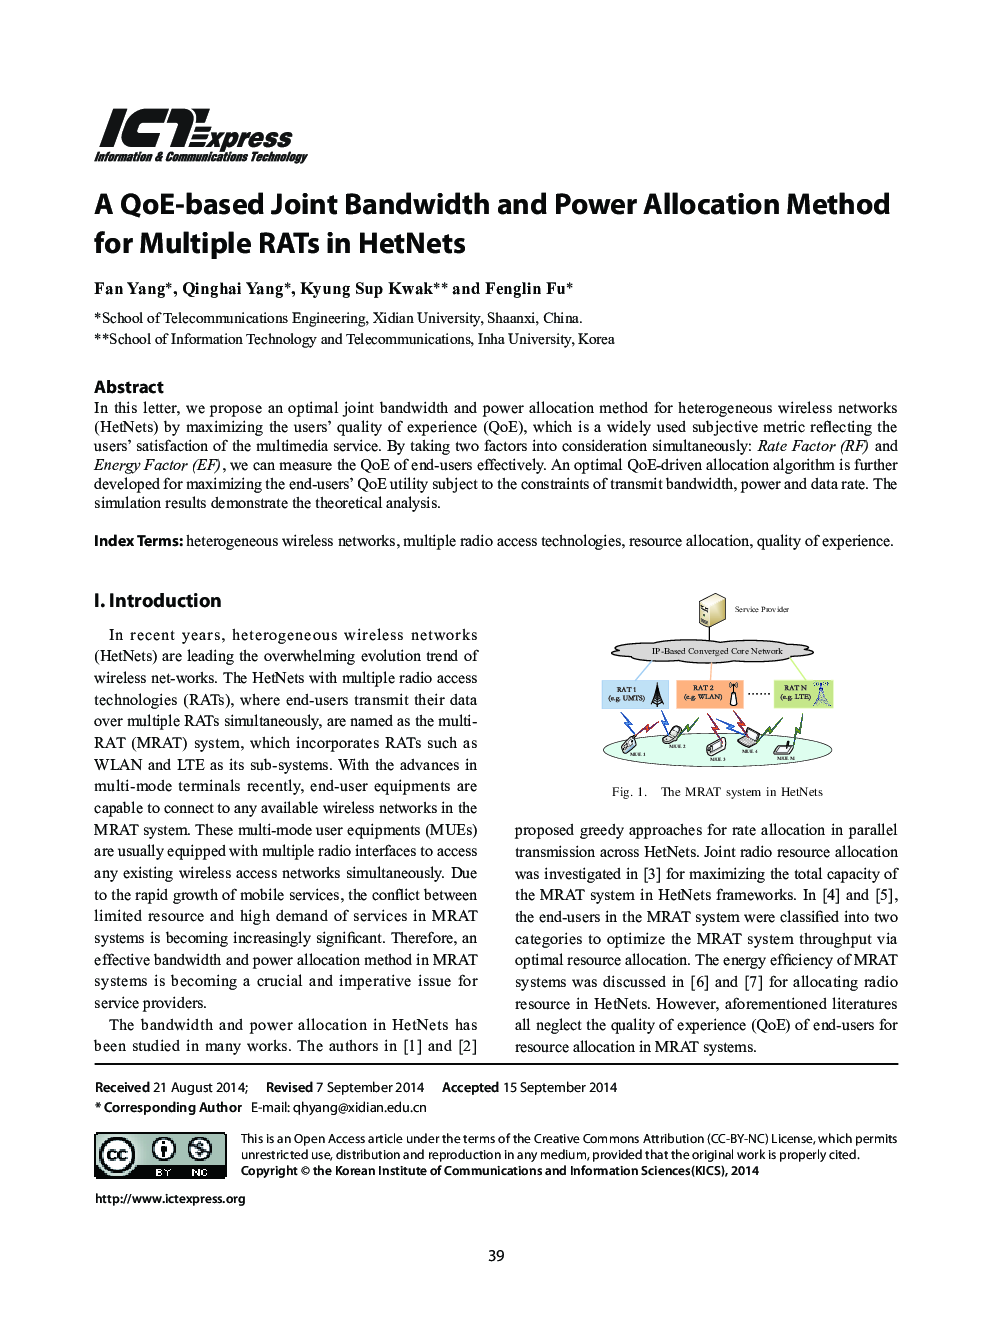 A QoE-based Joint Bandwidth and Power Allocation Method for Multiple RATs in HetNets 